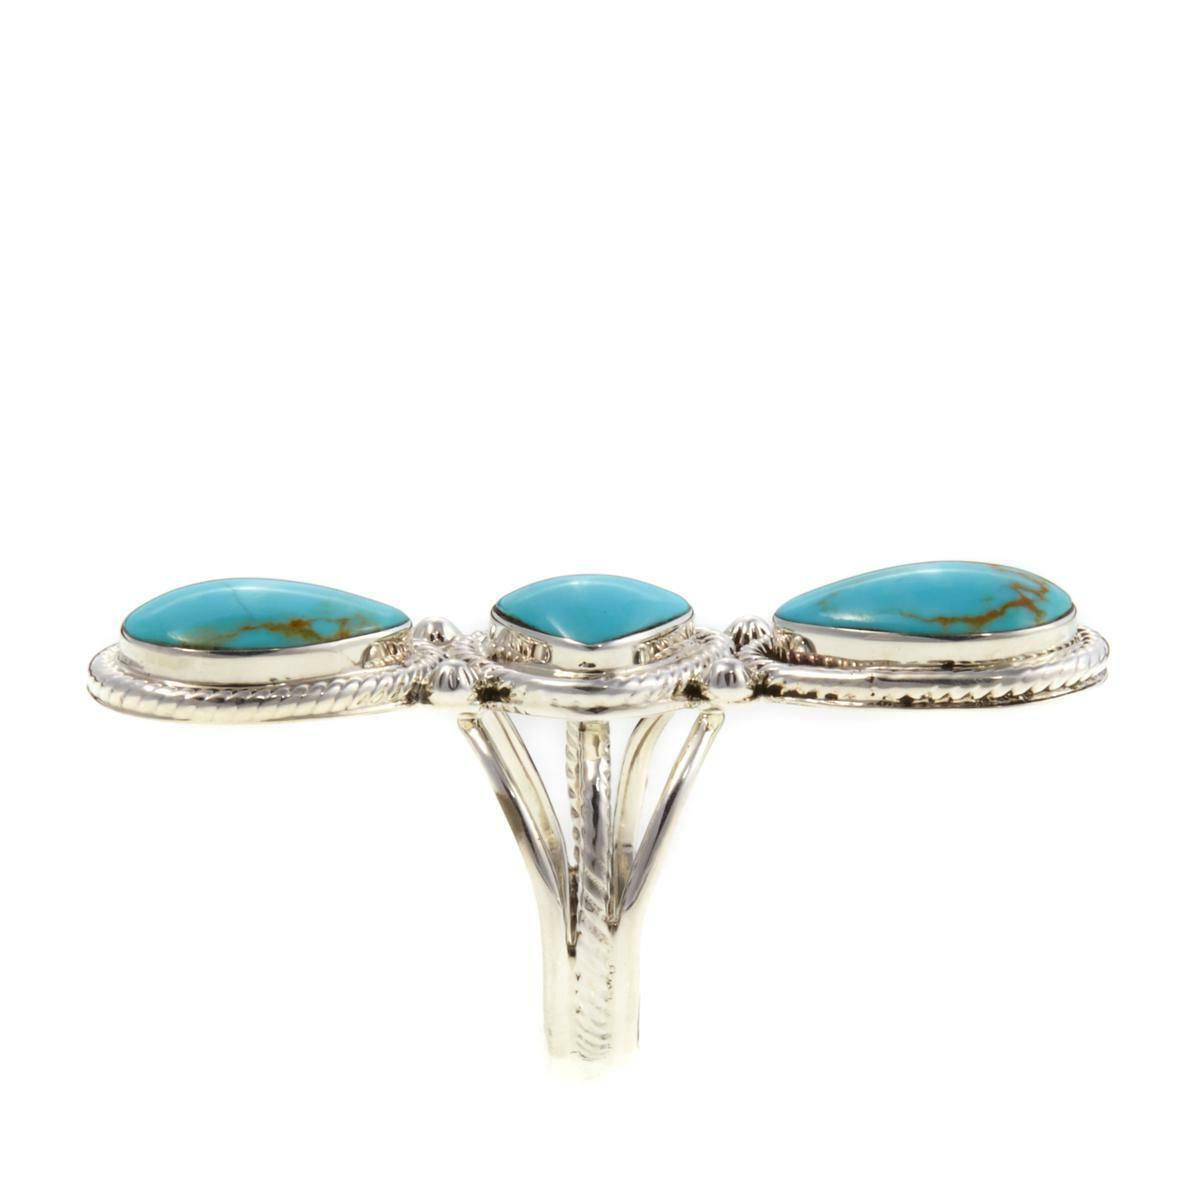 Chaco Canyon Multicut Kingman Turquoise Elongated Sterling Silver Ring Size 5